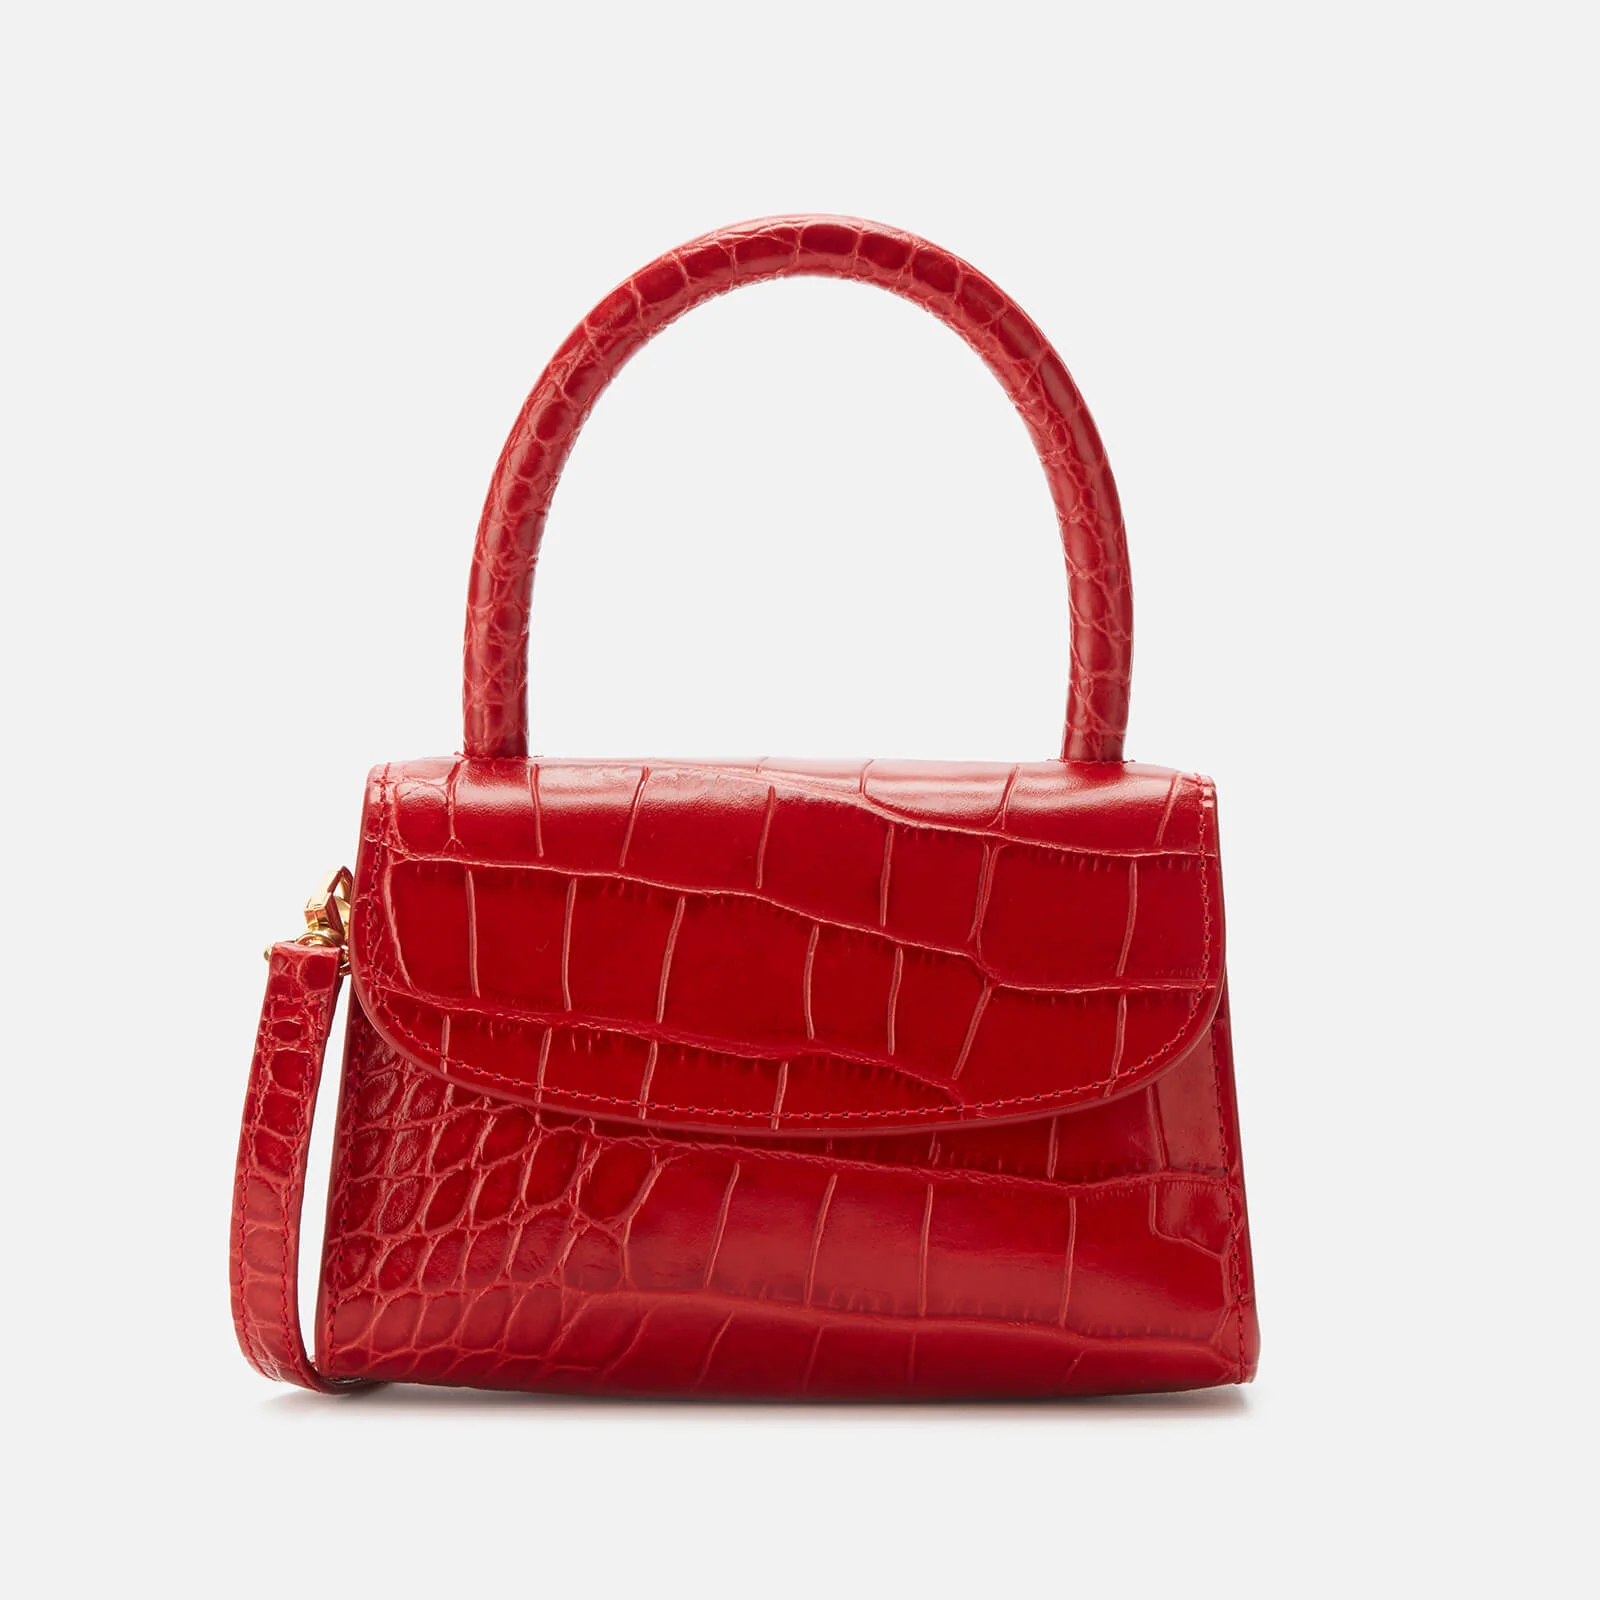 BY FAR Women's Mini Croco Embossed Leather Tote Bag - Red Image 1